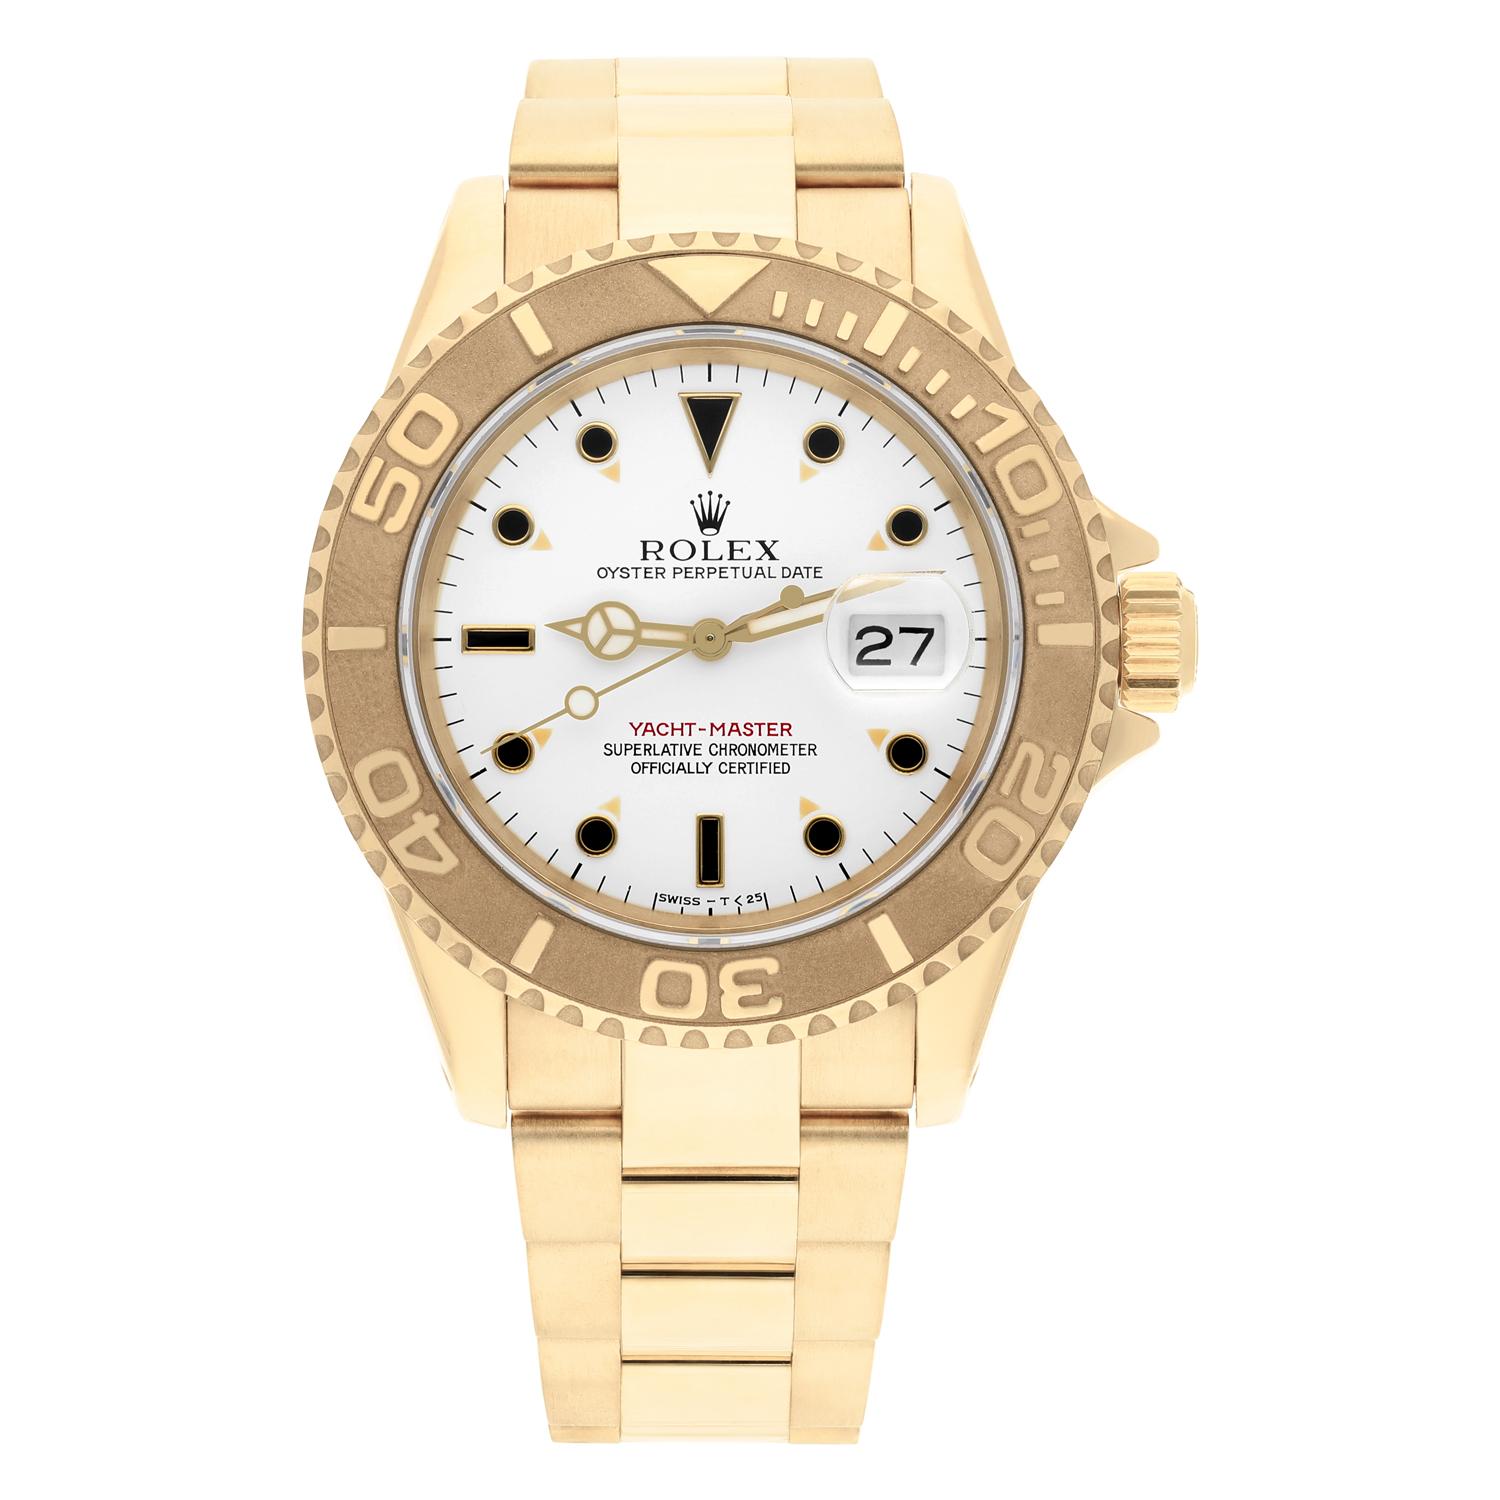 This watch has been professionally polished, serviced and does not have any visible scratches or blemishes. It is a genuine Rolex which has been inspected to verify authenticity. 

Sale comes with a jewelry box and appraisal certificate. Attached to